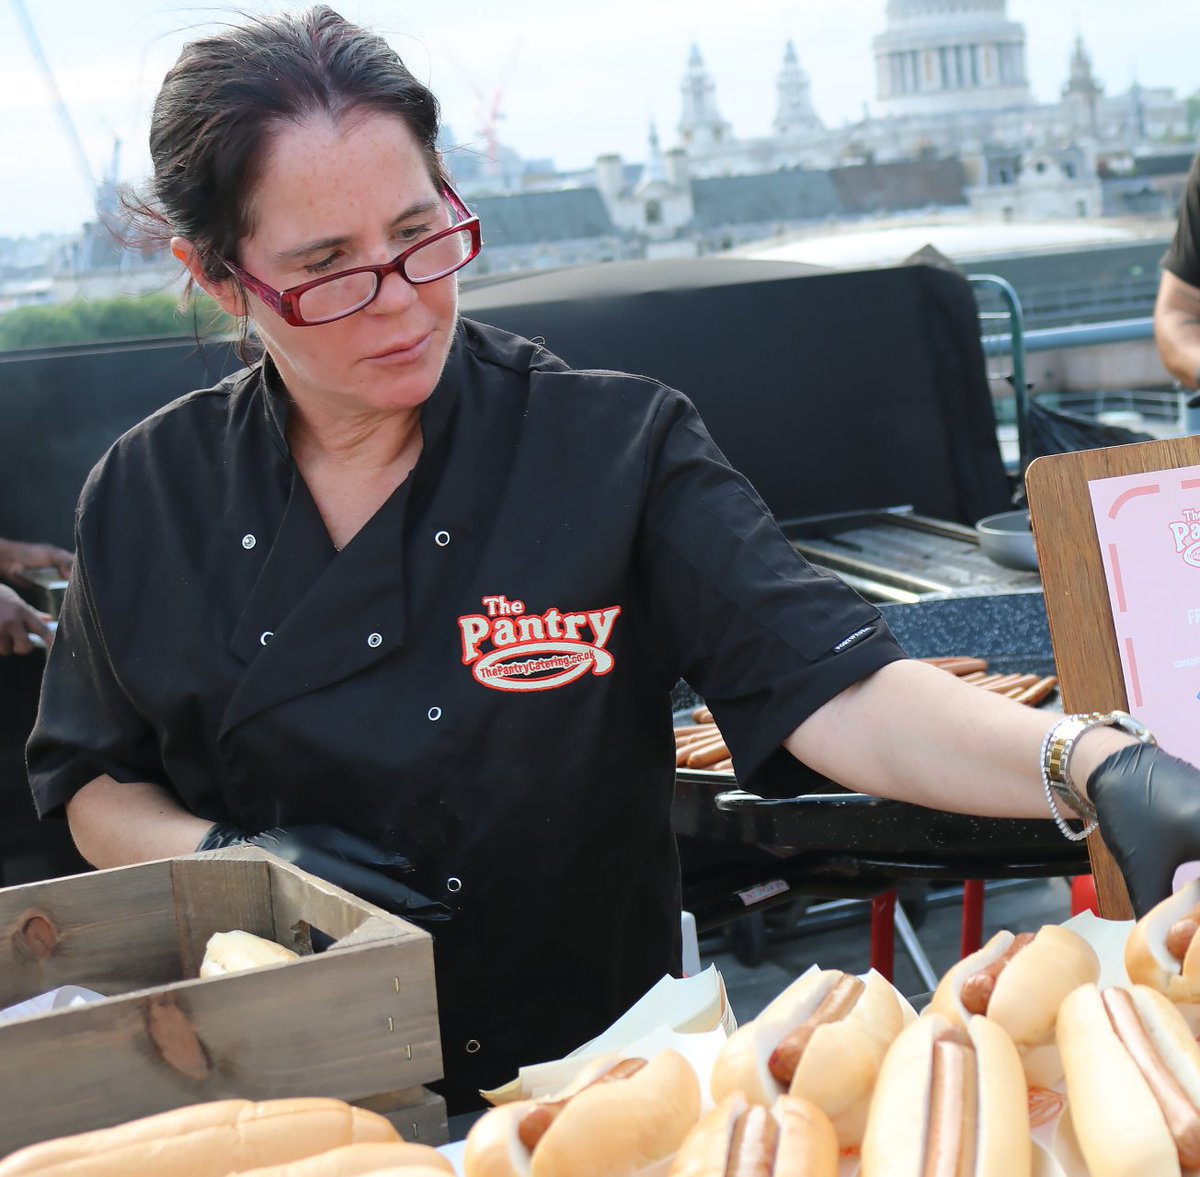 🌈 We celebrated love, equality, and diversity at the incredible Pride event with IG! 🎉✨
#prideevents #IG #LondonCatering #privateevents #corperatecatering #eventscatering #food #hotdogs #londonskyline #chef #teampantry #pantrykitchens #thepantry